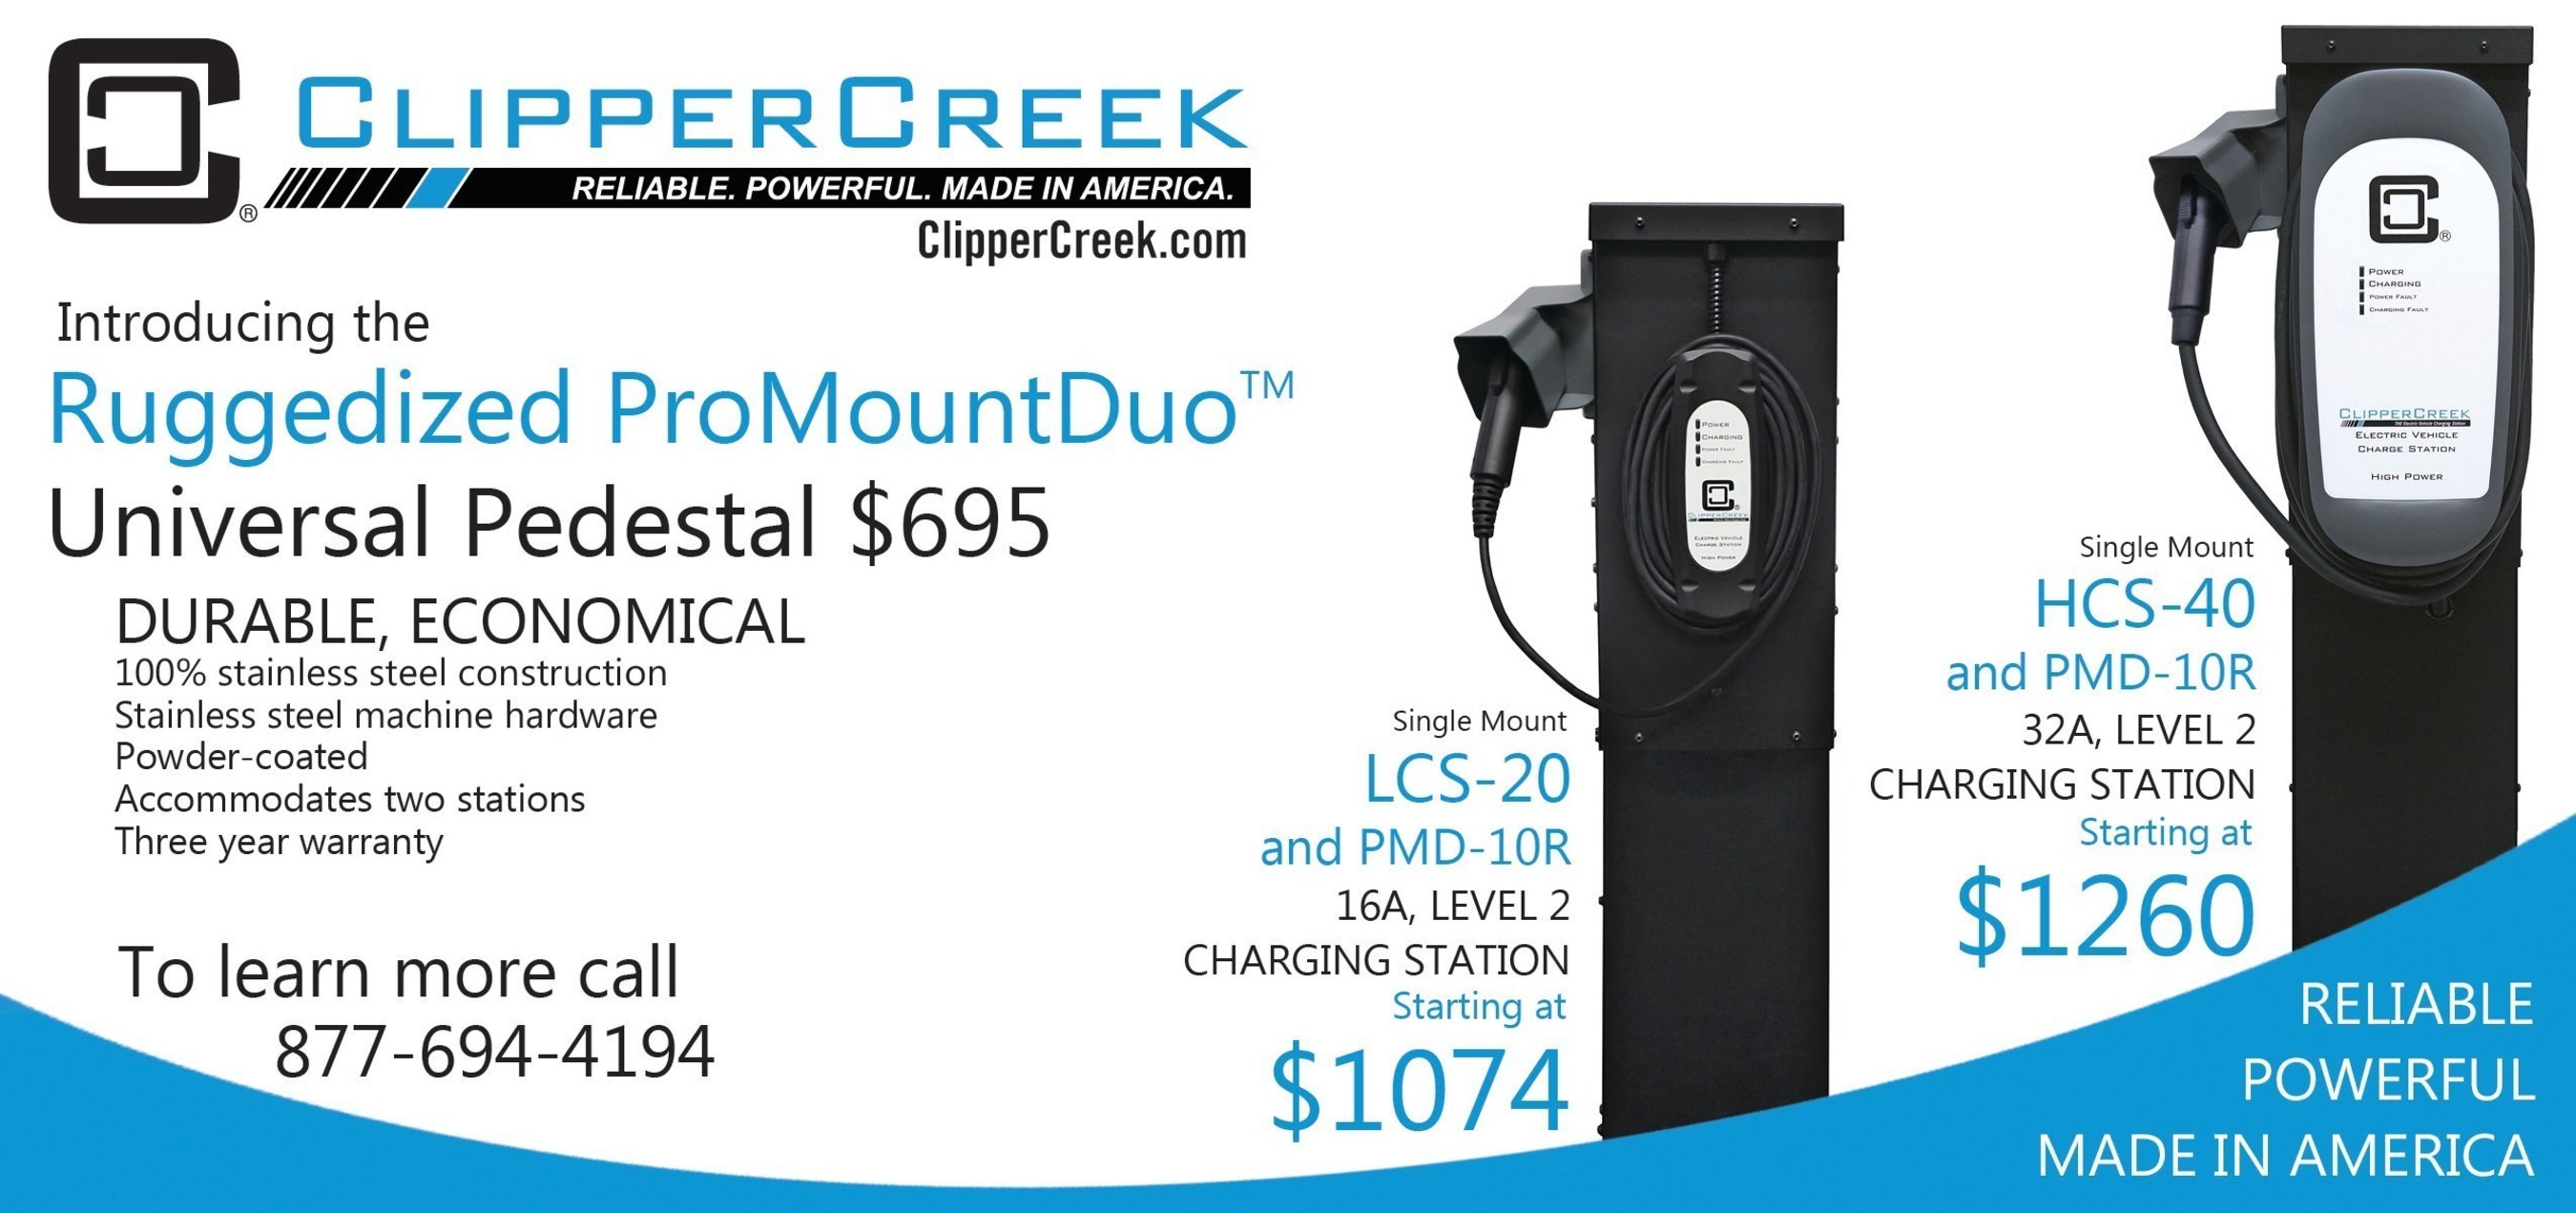 The Ruggedized ProMountDuo Universal Pedestal for electric vehicle charging stations is now available from ClipperCreek, Inc. for just $695